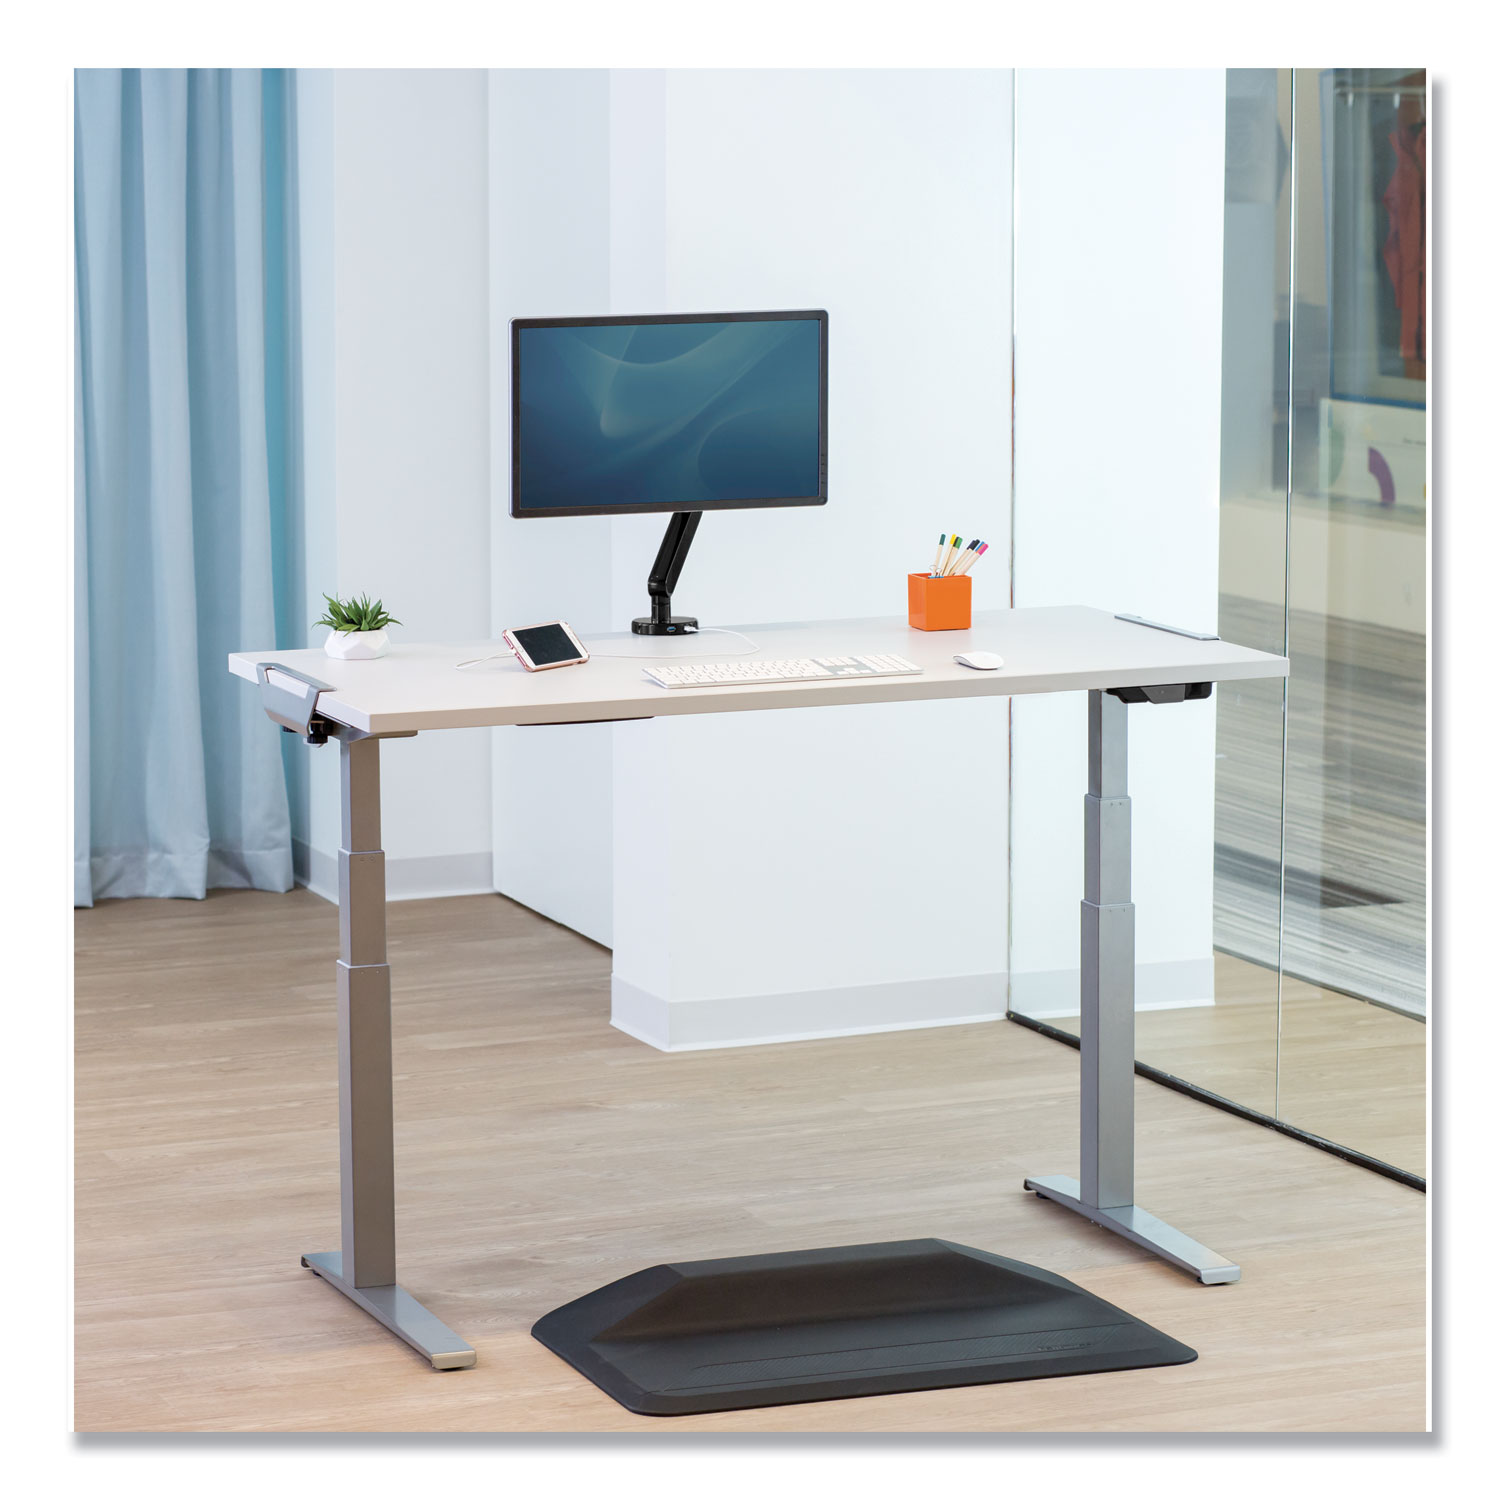  Fellowes 9649601 Levado Laminate Table Top (Top Only), 72w x 30d, Gray (FEL9649601) 